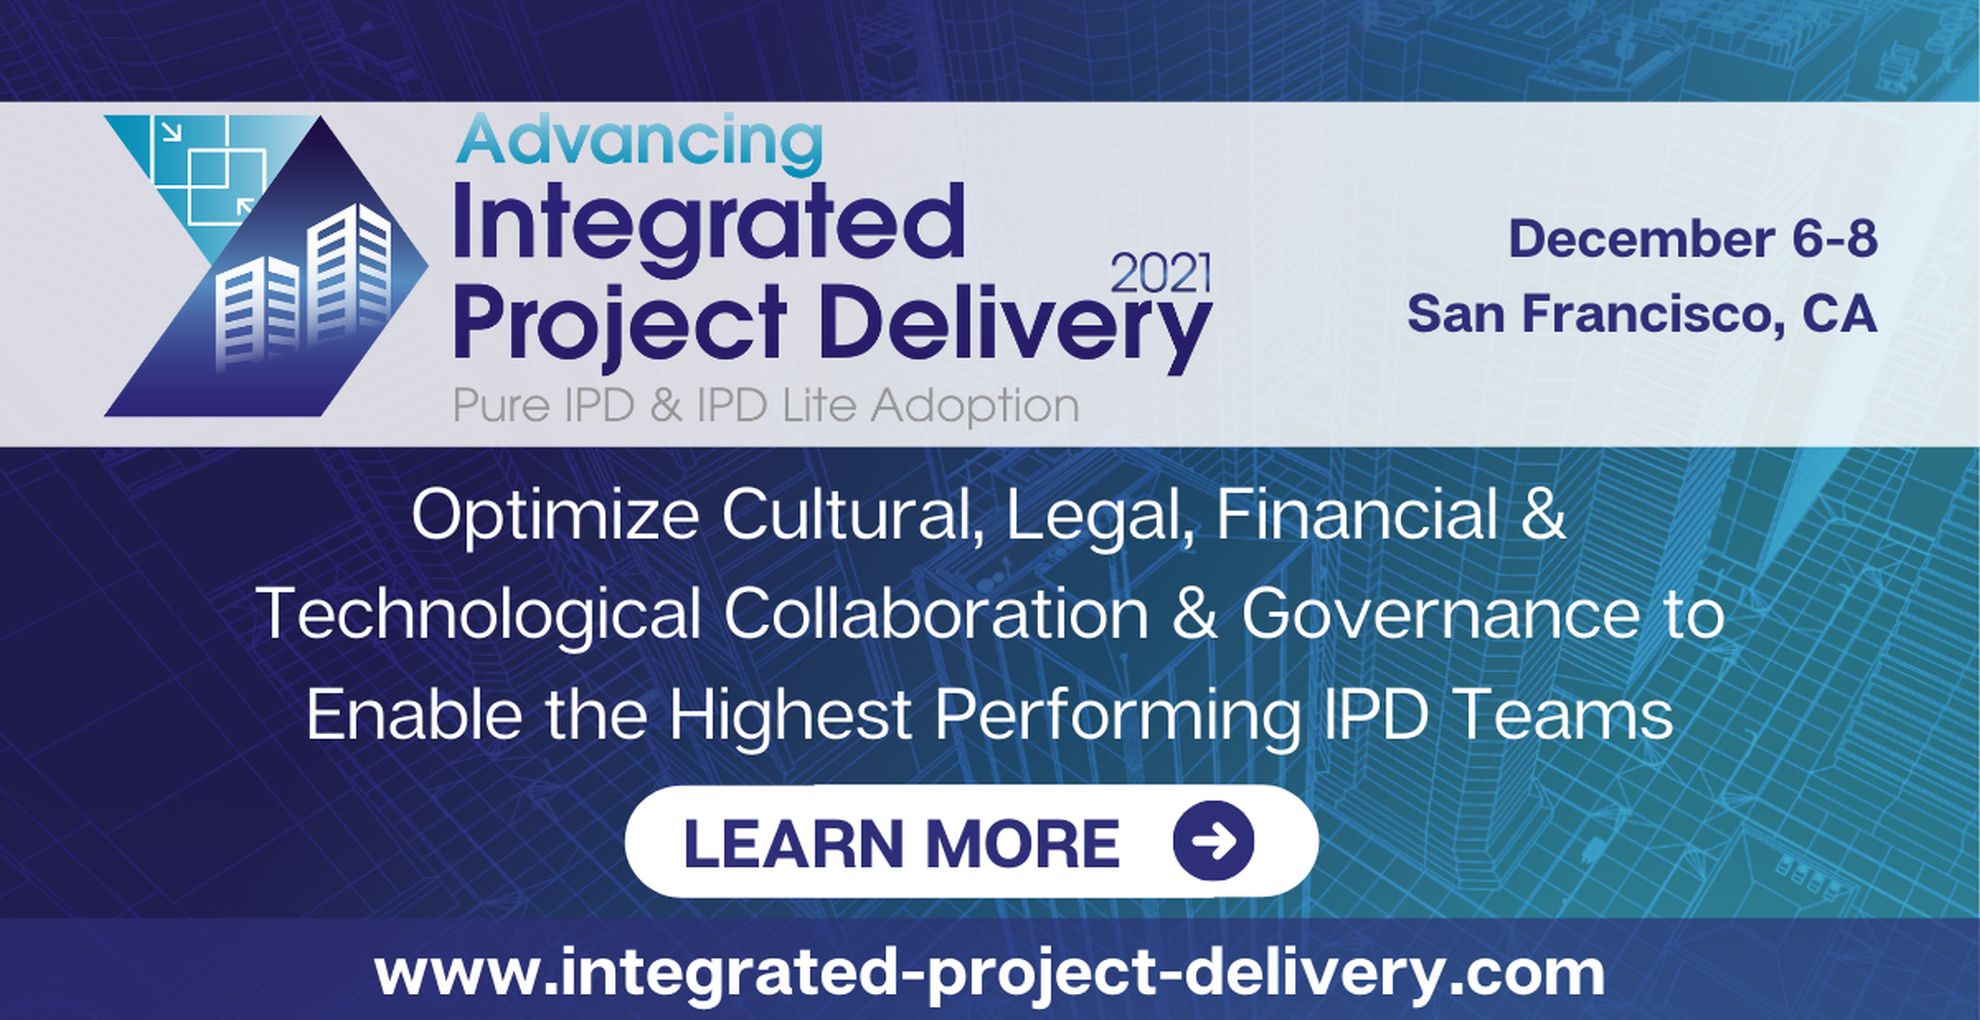 Advancing Integrated Project Delivery 2021, San Francisco, California, United States